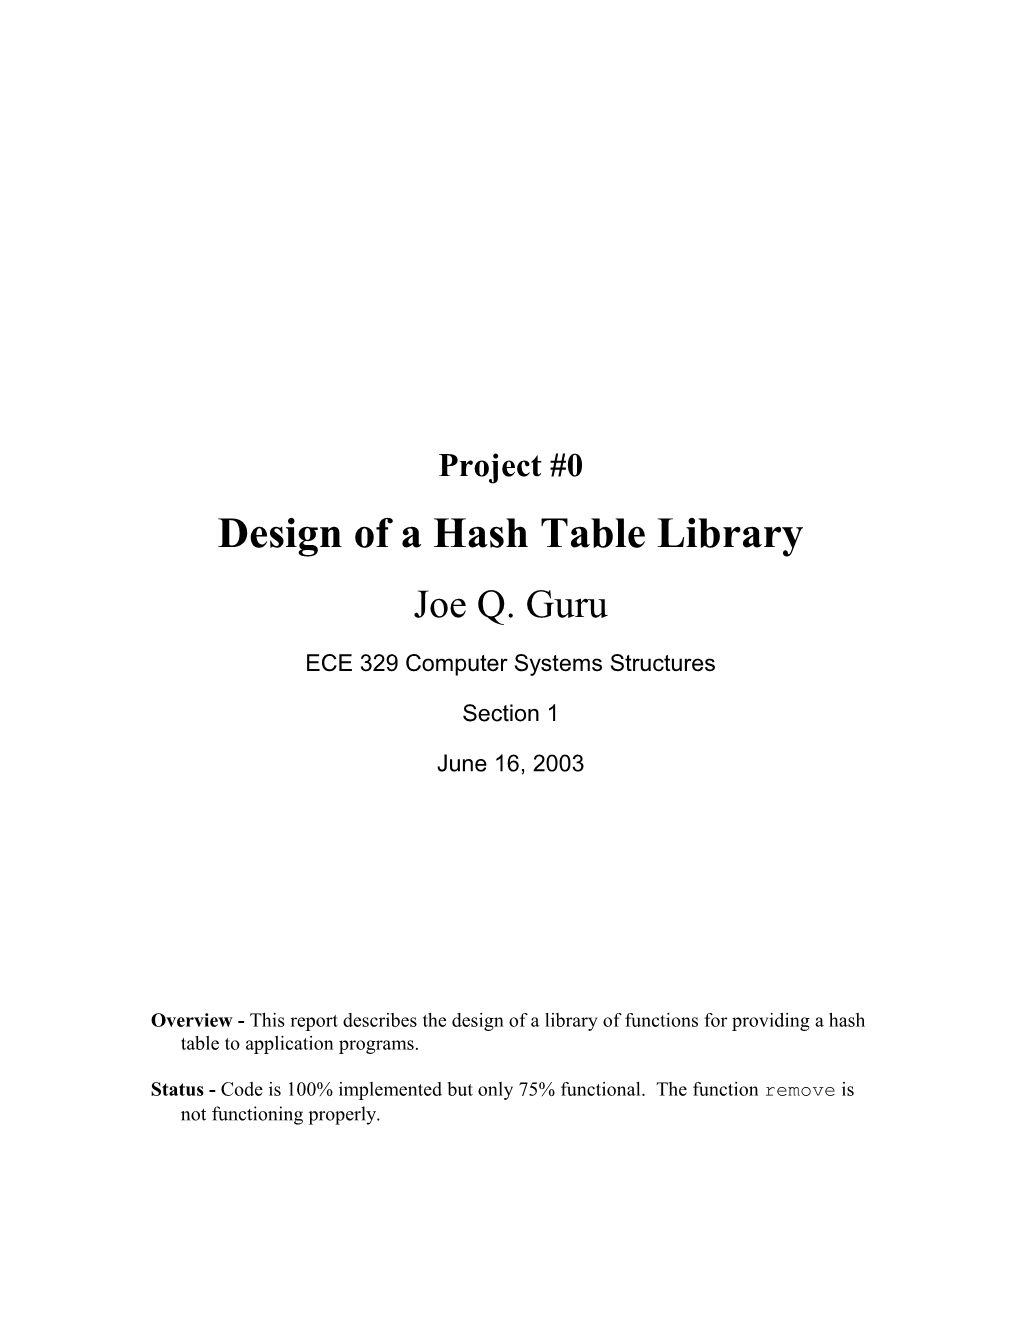 Design of a Hash Table Library